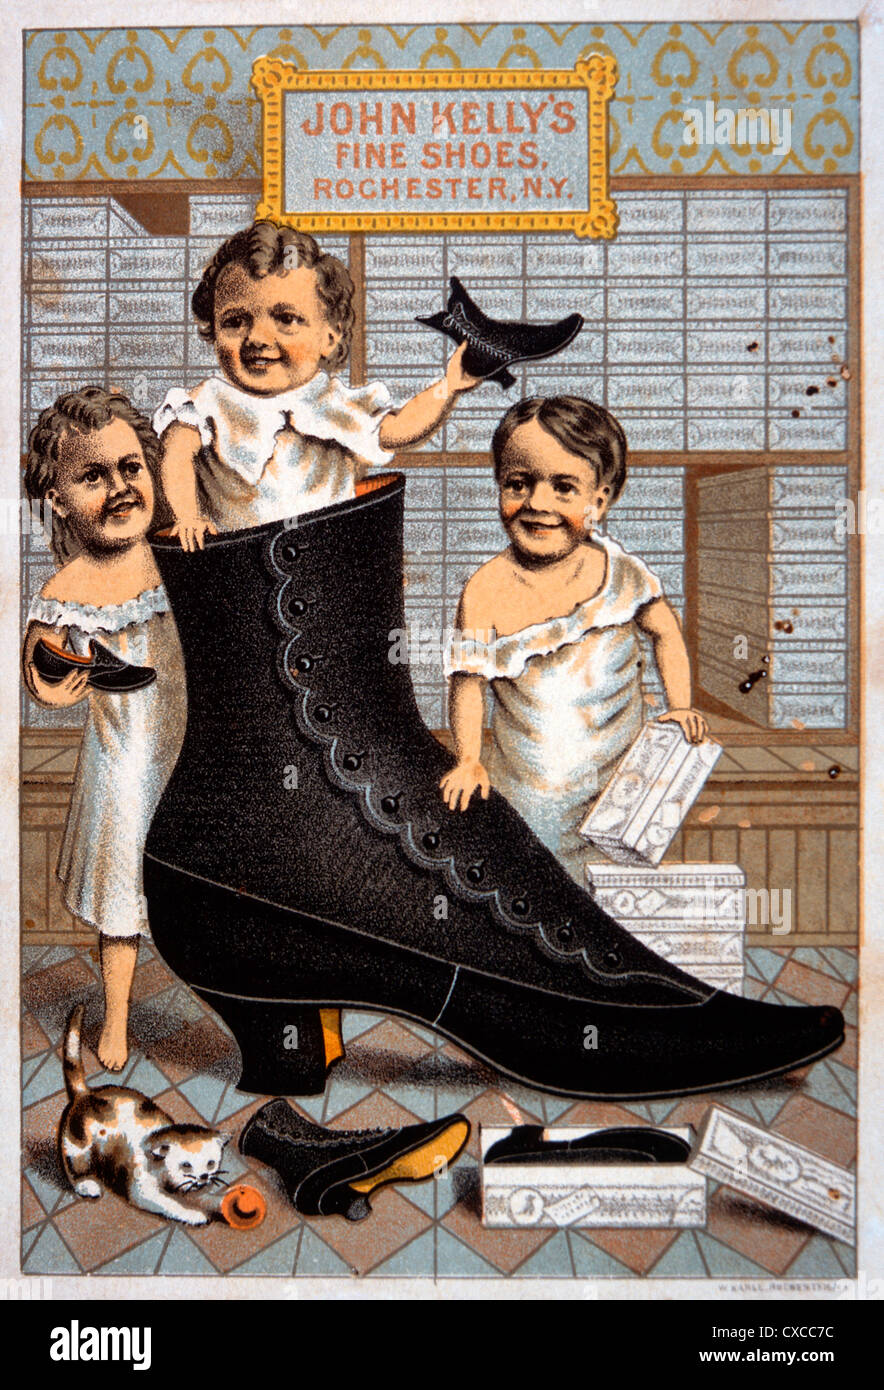 W3566 eagle shoes-advertisement 1925-advertising 